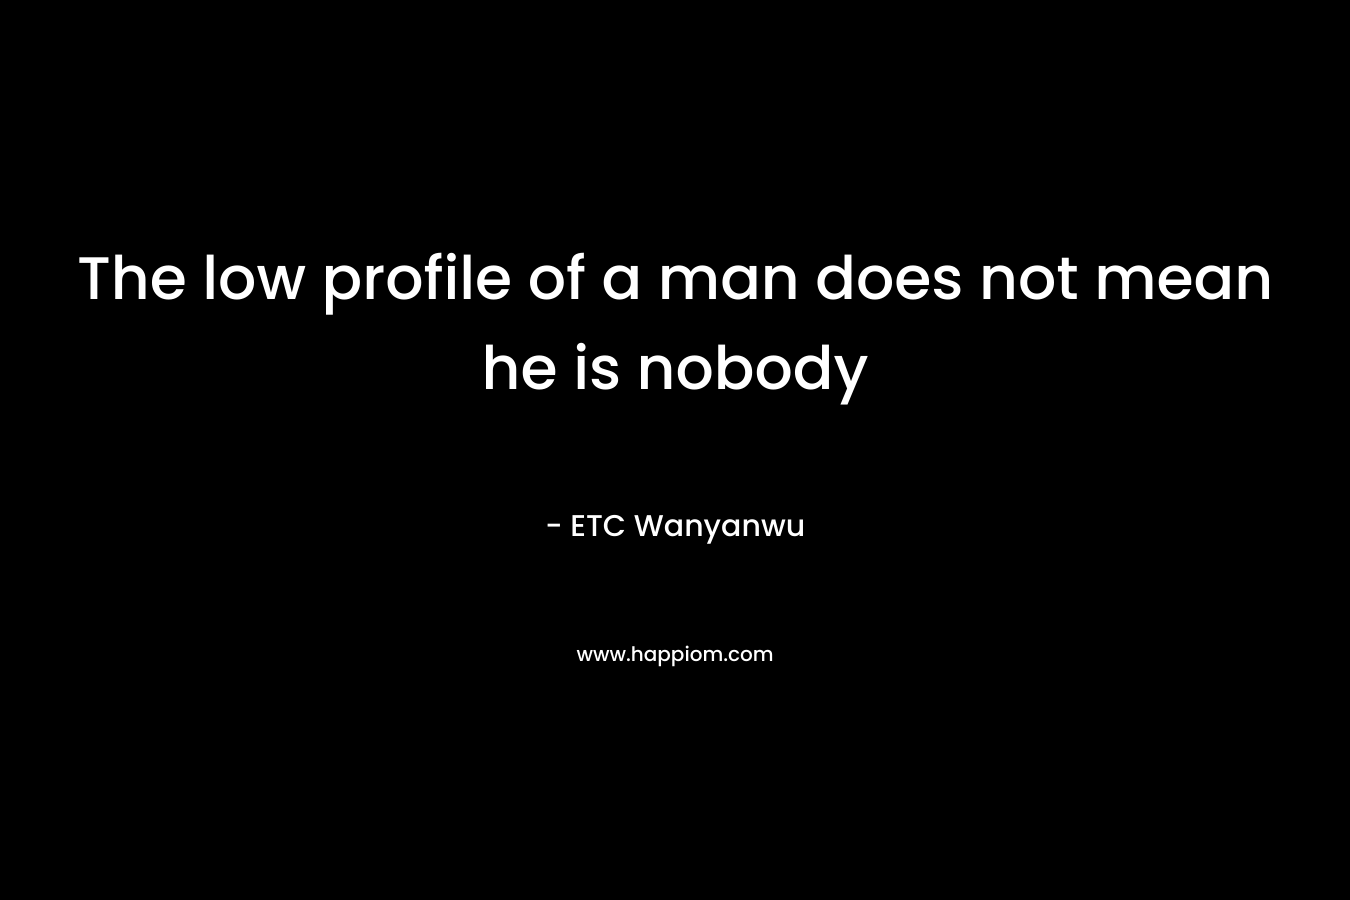 The low profile of a man does not mean he is nobody – ETC Wanyanwu